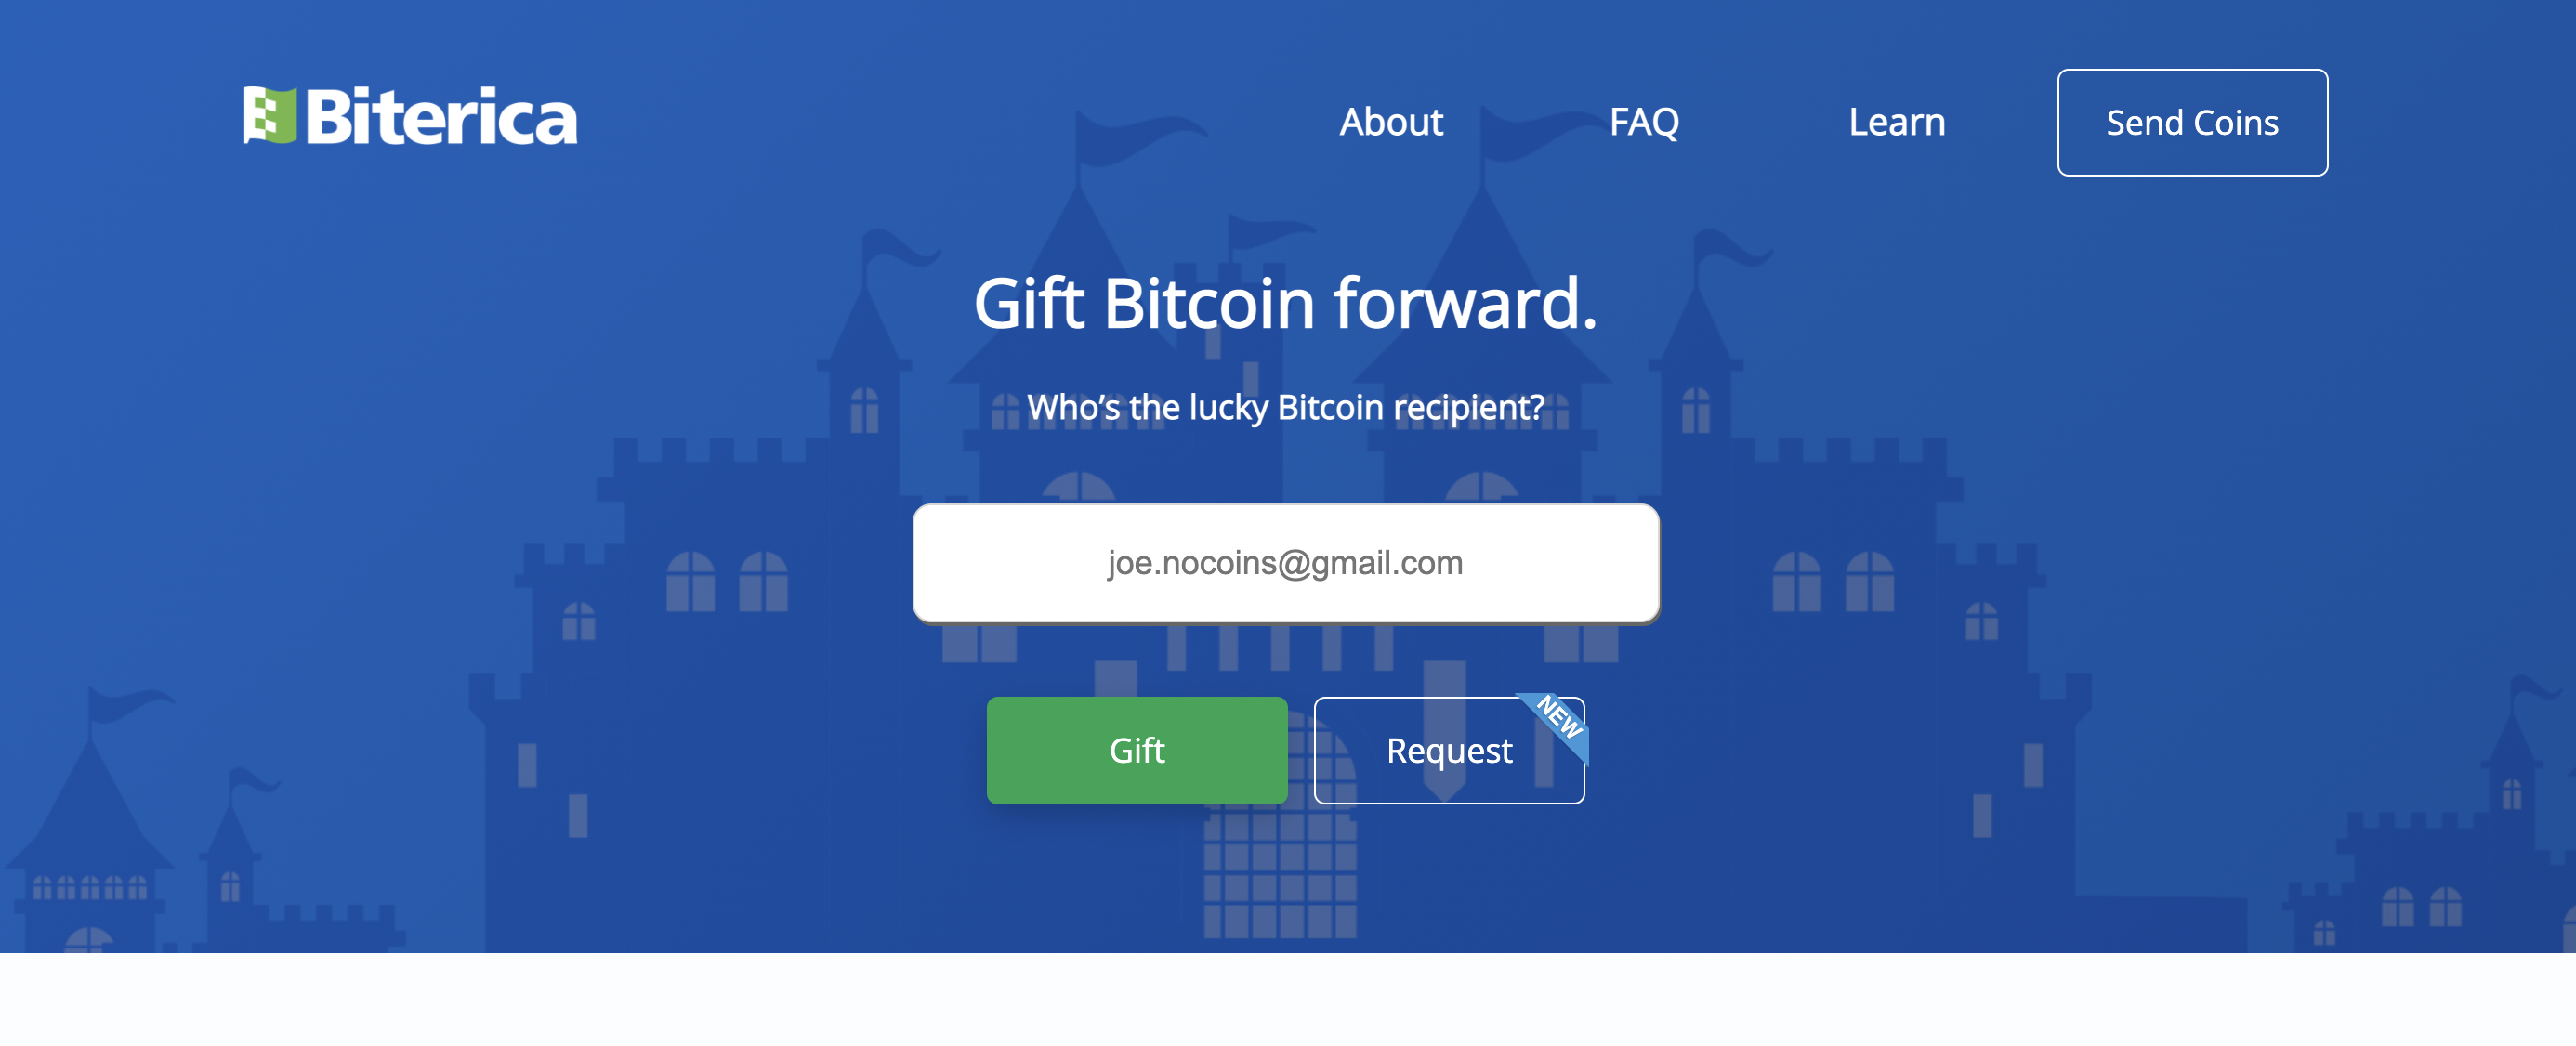 pic_2_How_To_Gift_Bitcoin